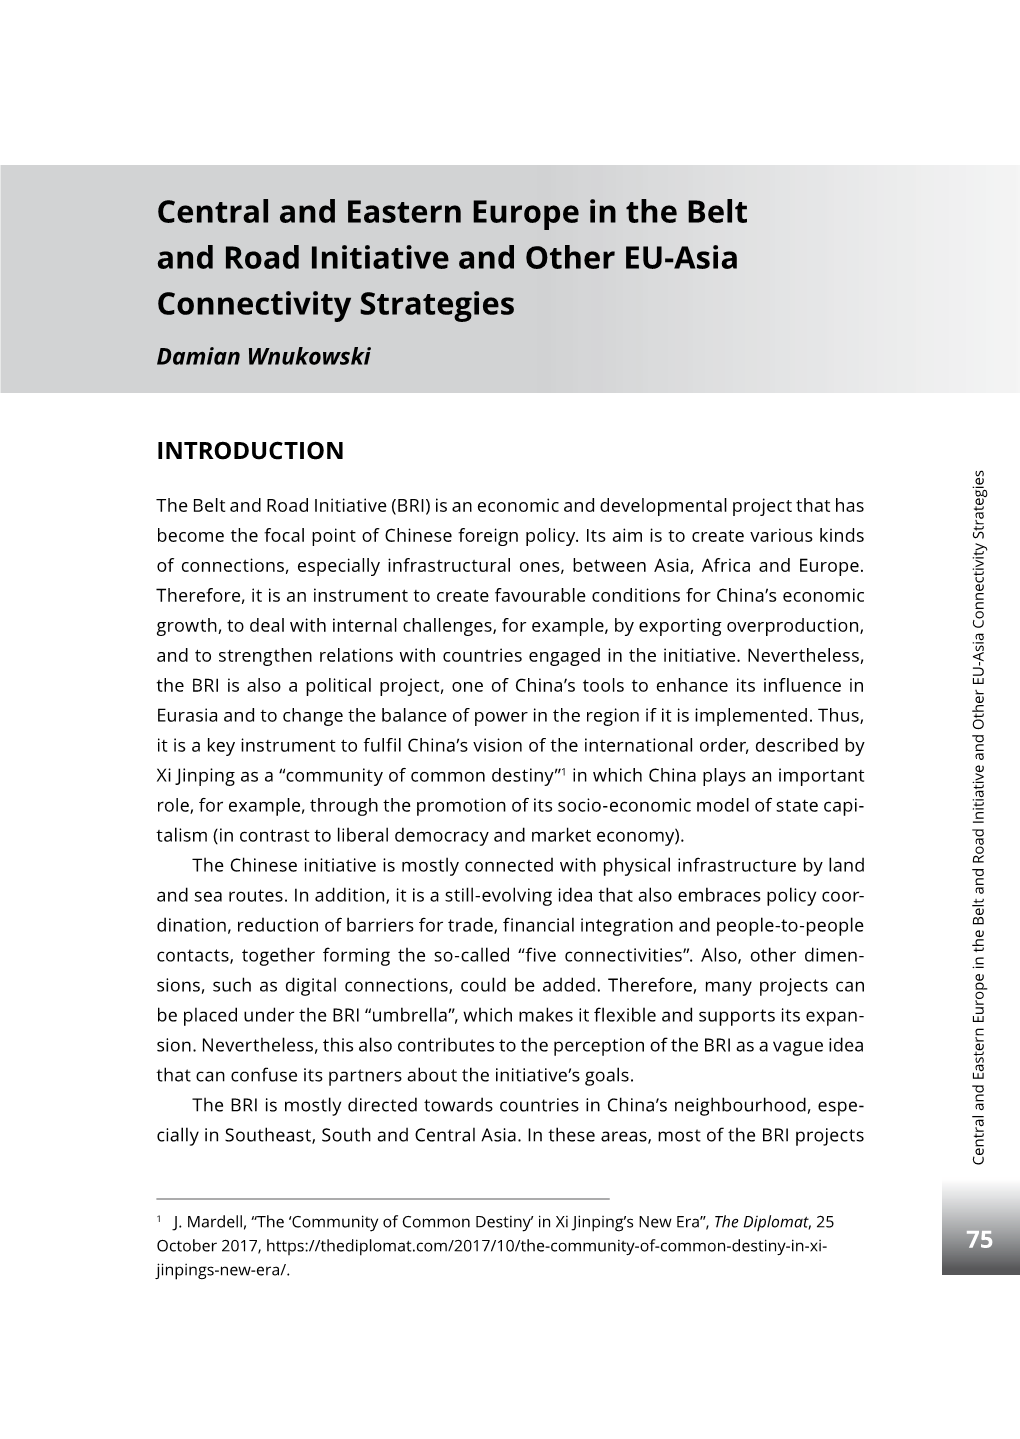 Central and Eastern Europe in the Belt and Road Initiative and Other EU-Asia Connectivity Strategies